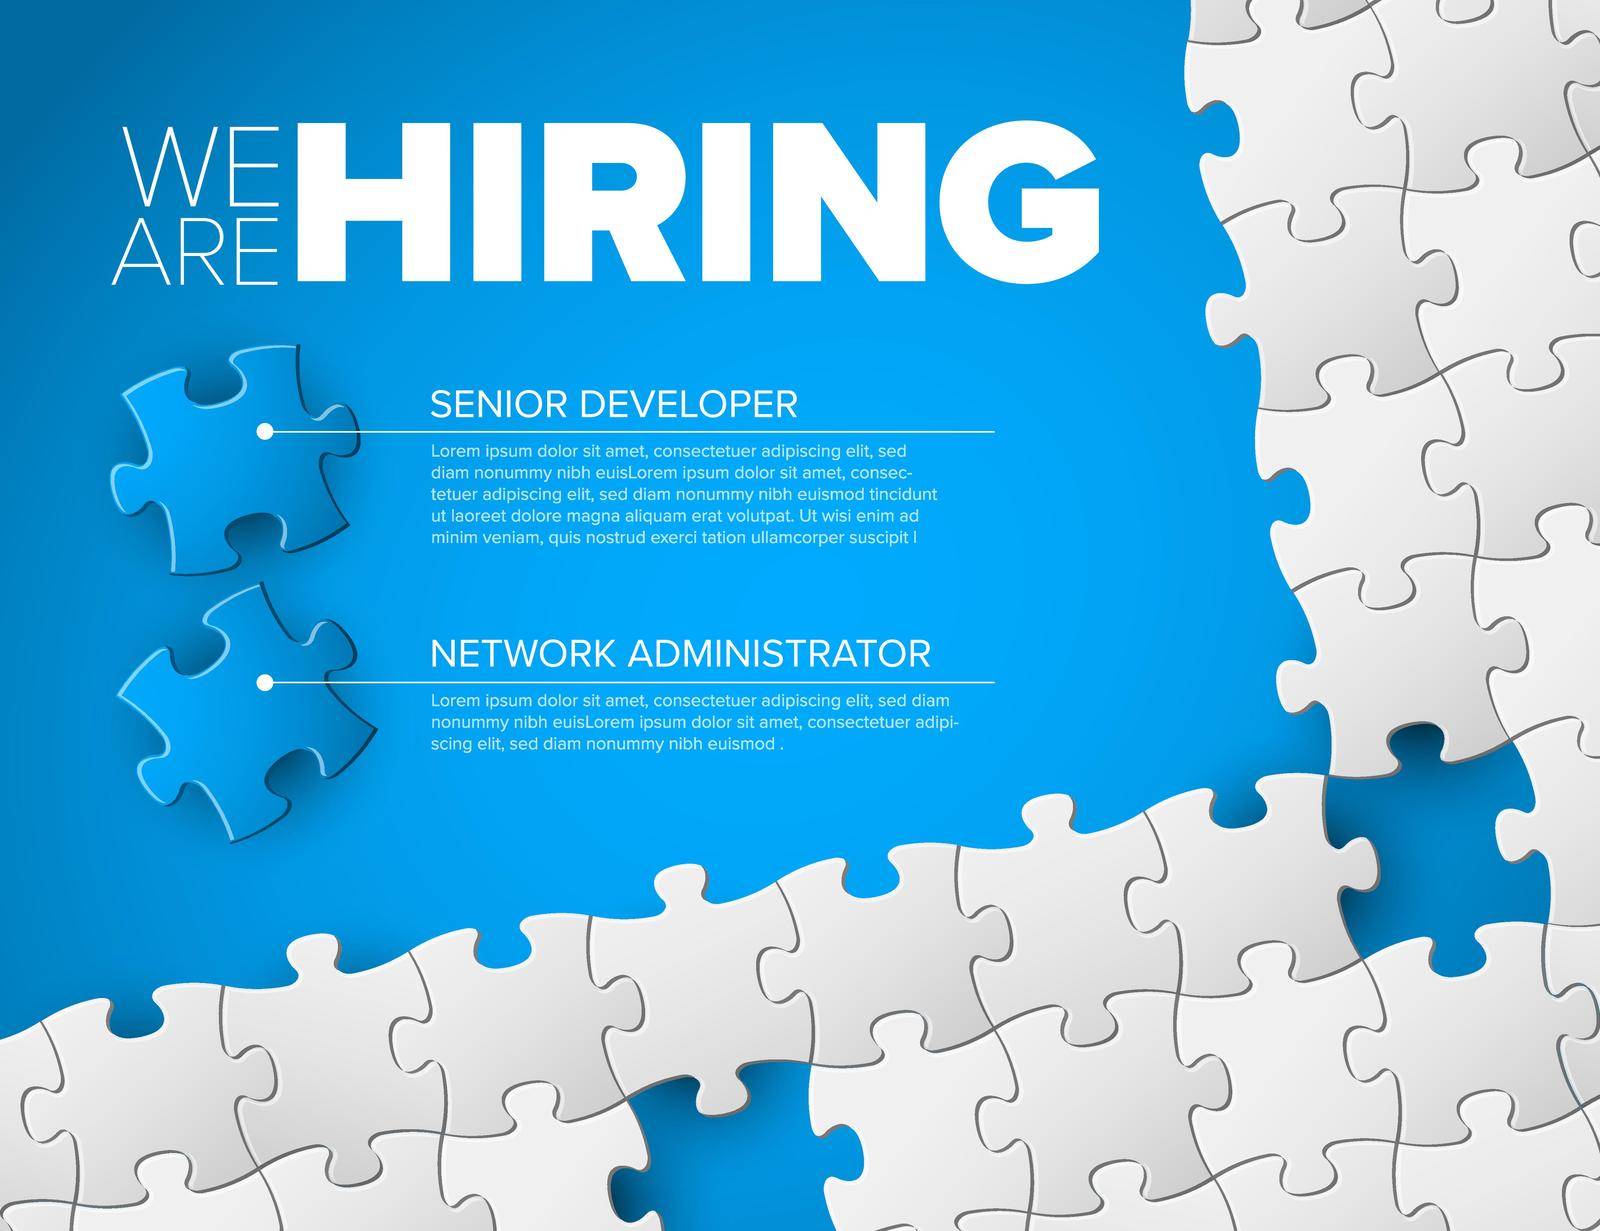 We are hiring minimalistic blue flyer template with puzzle pieces - looking for new members of our team hiring a new member colleages to our company organization team simple motive with puzzles